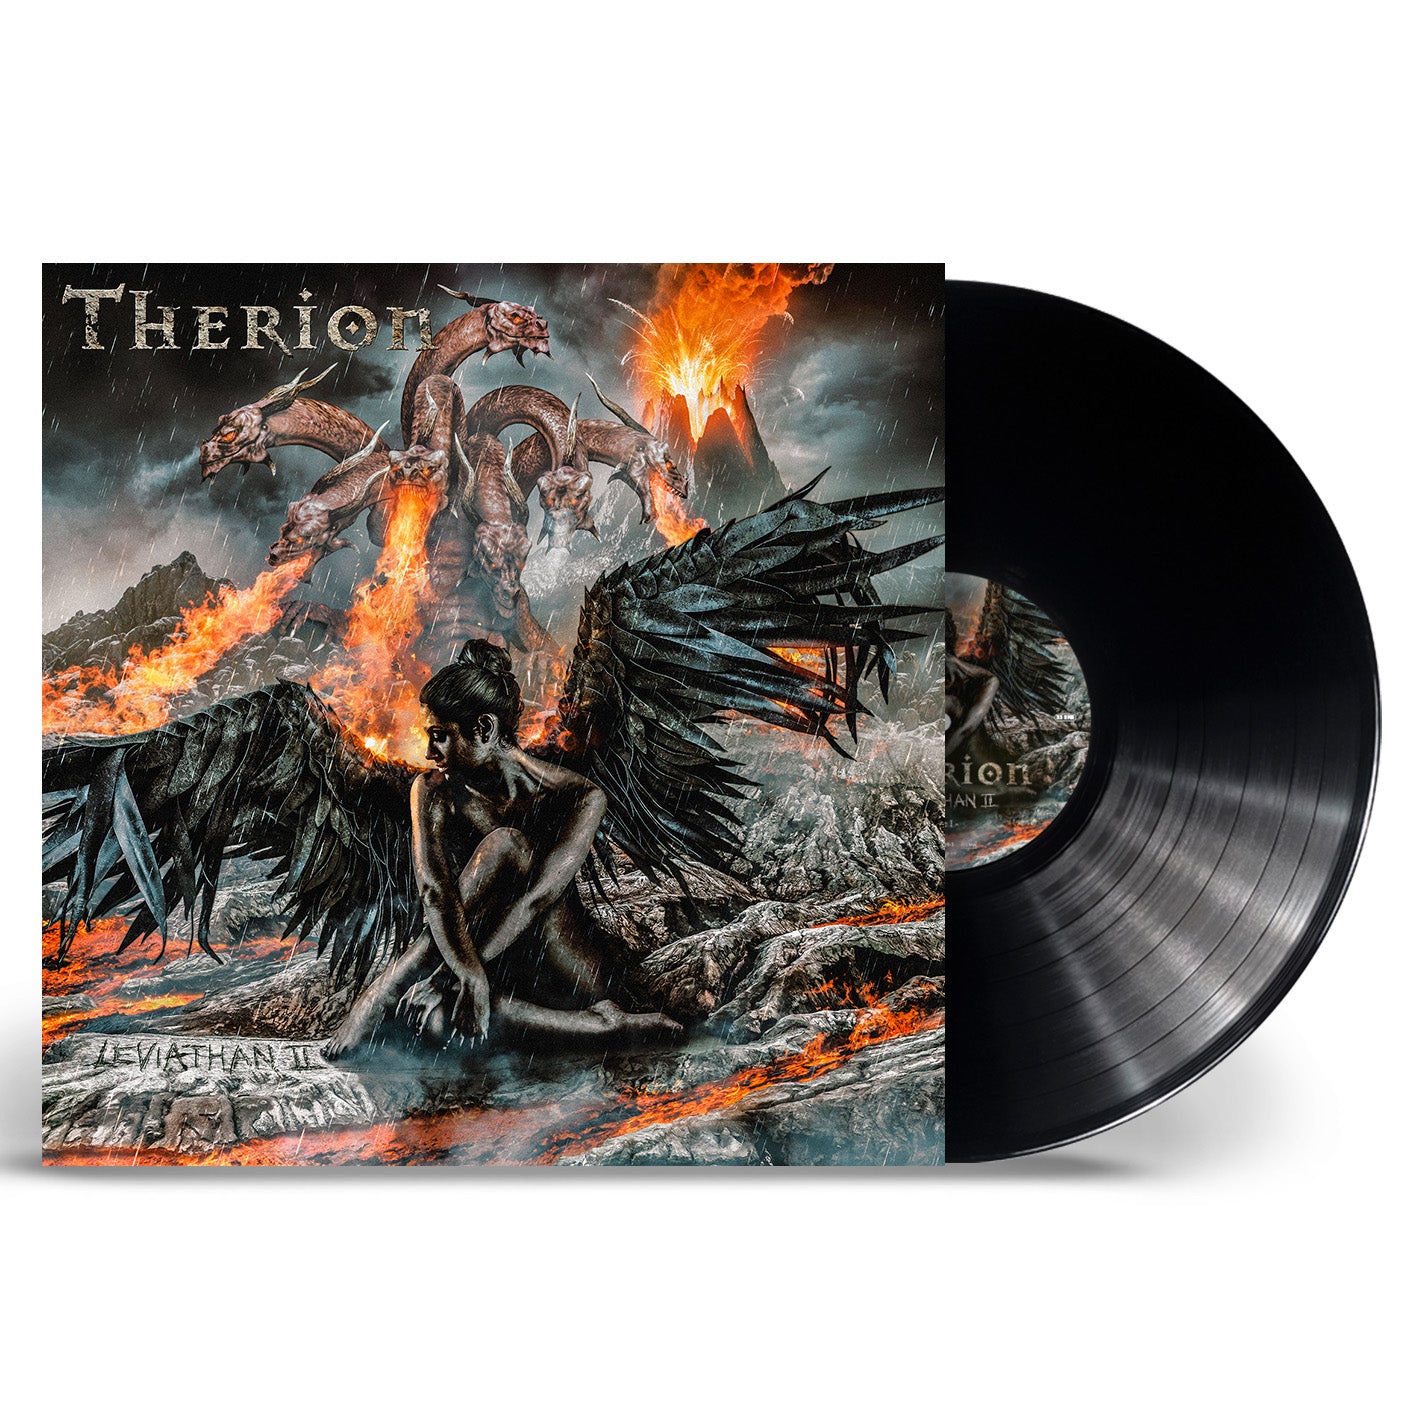 Therion "Leviathan II" Vinyl